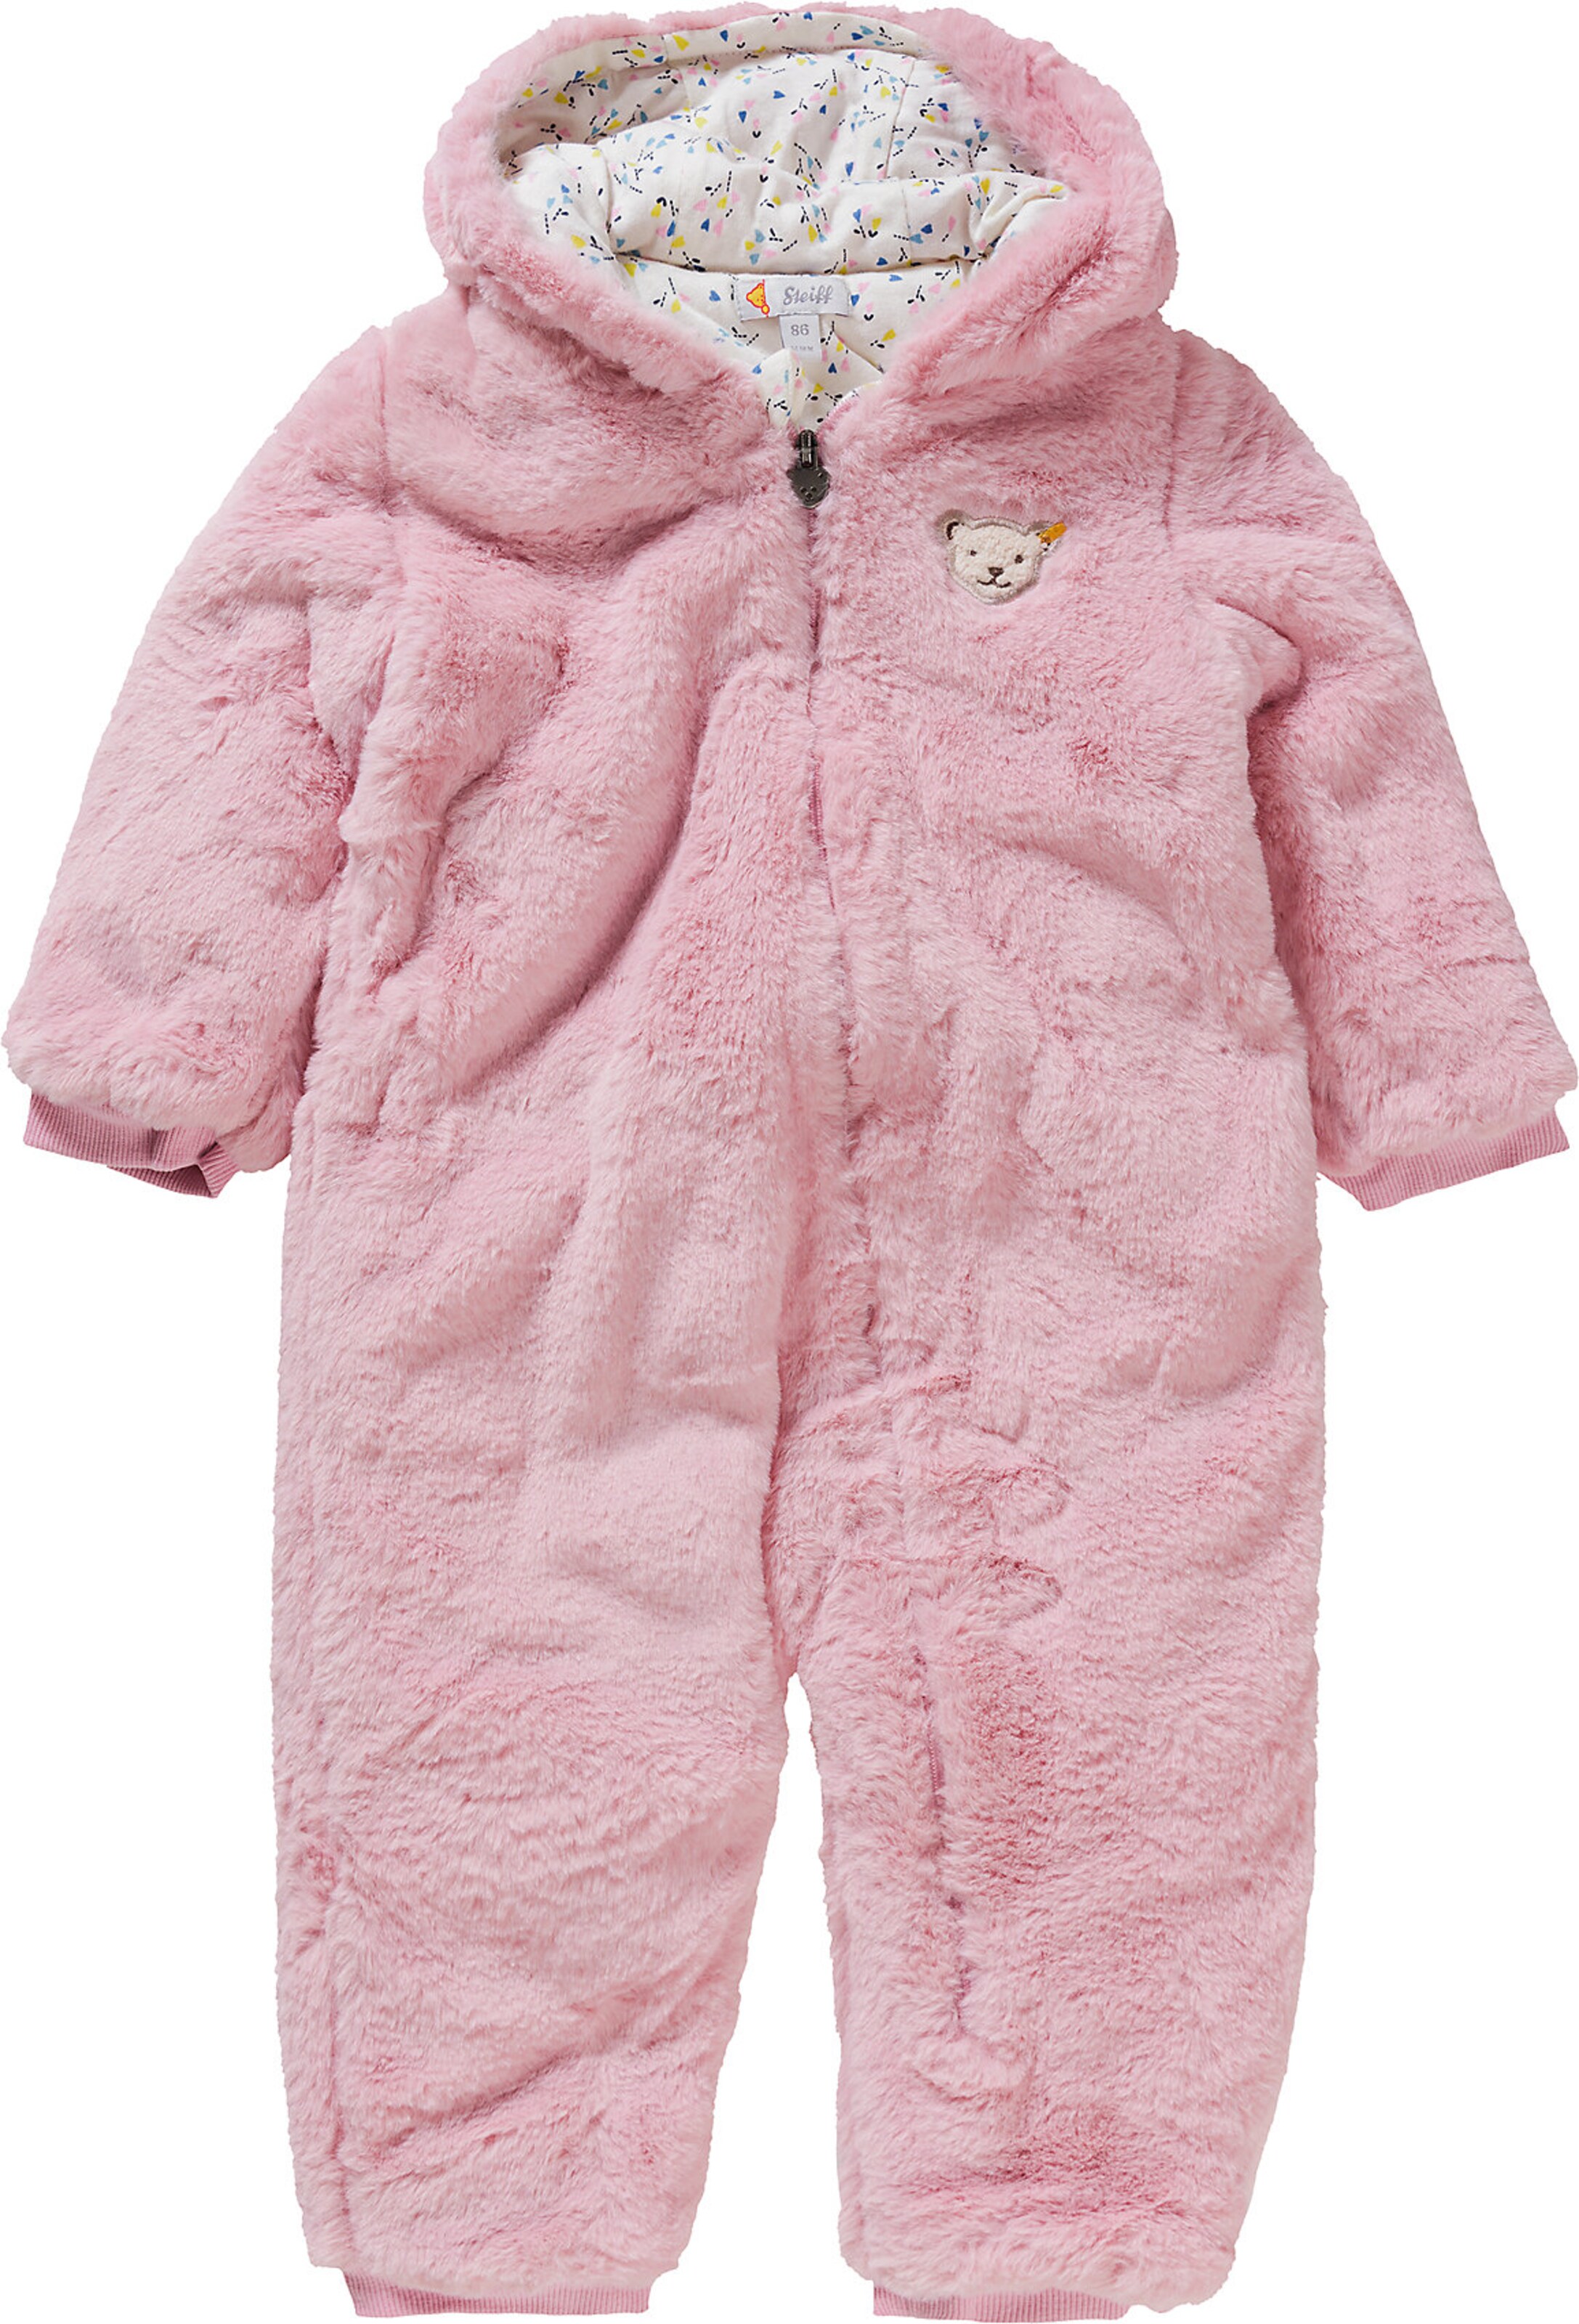 Kinder Bekleidung STEIFF Baby Overall in Rosa - IB62687